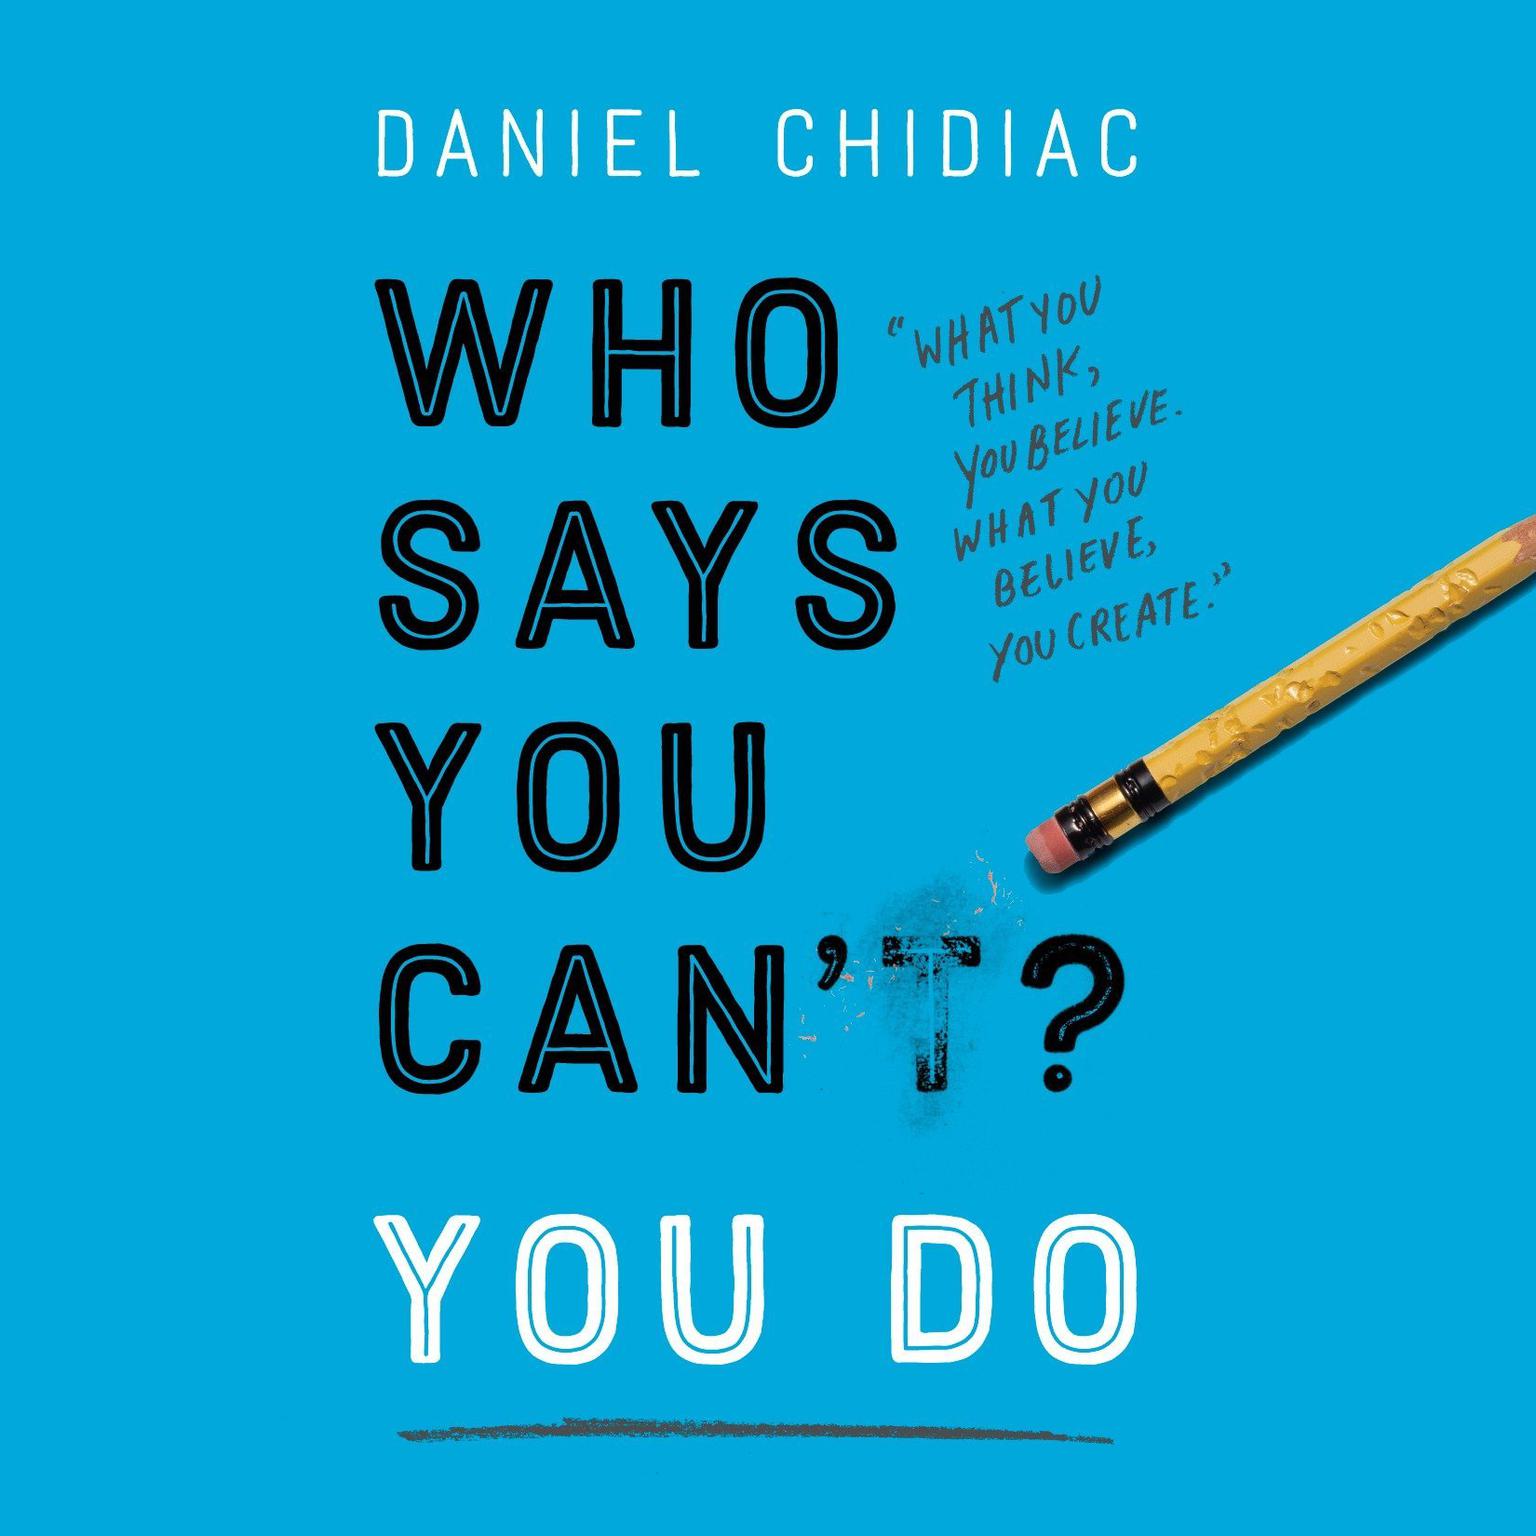 Who Says You Cant? You Do Audiobook, by Daniel Chidiac